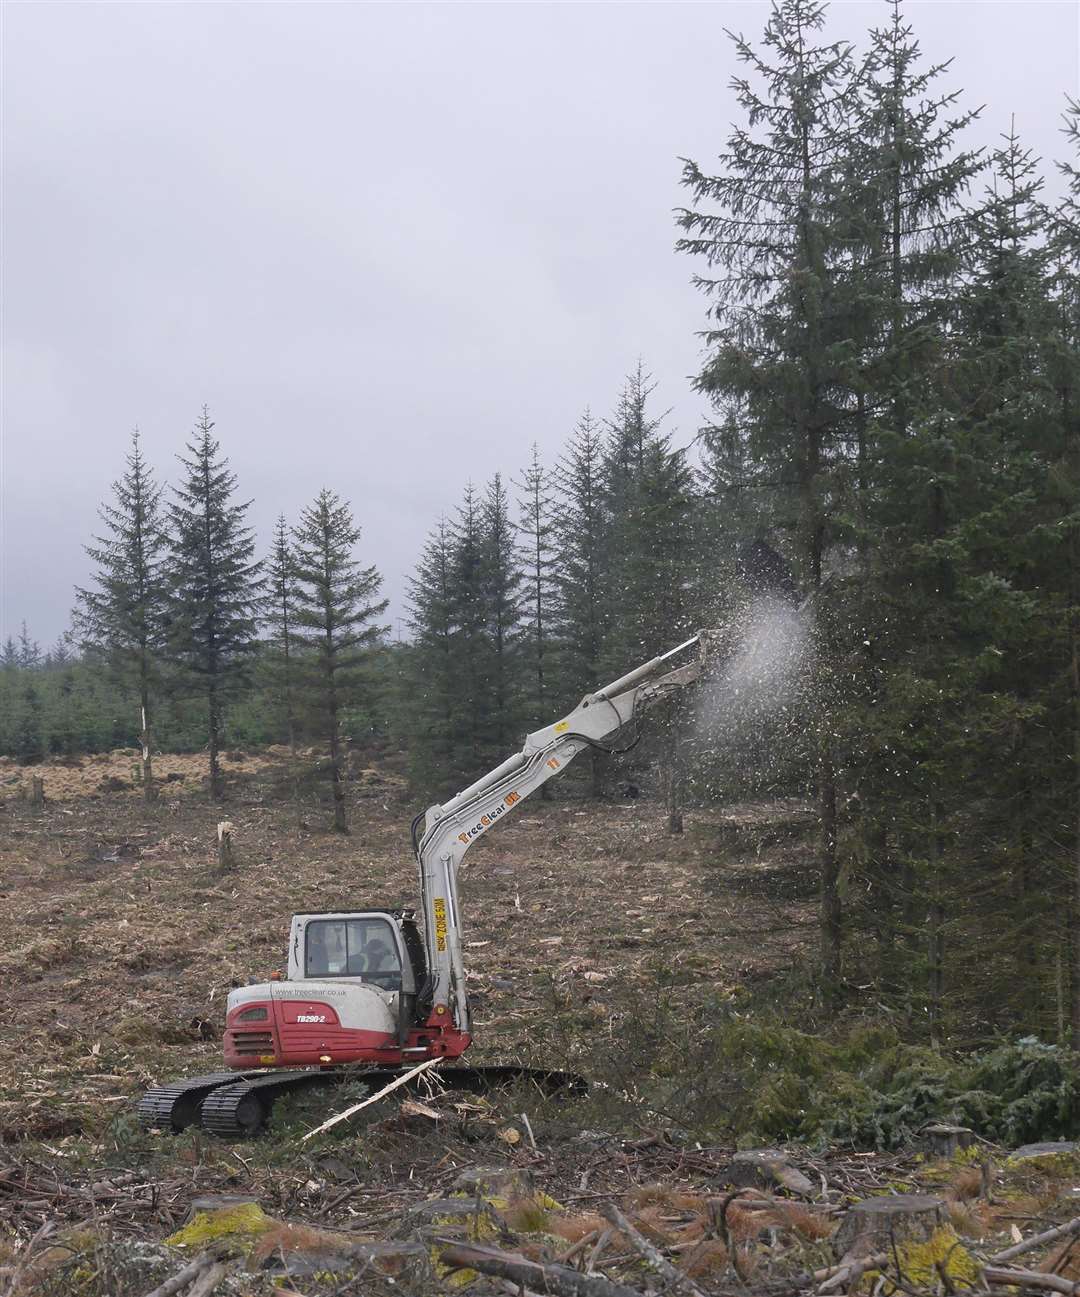 A hi-tech vertical mulching machine being used to remove trees to help restore part of the Border Mires in Kielder Forest as part of a swathe of ancient peat bogs in northern England’s “Border Mires” (Forestry England/PA)